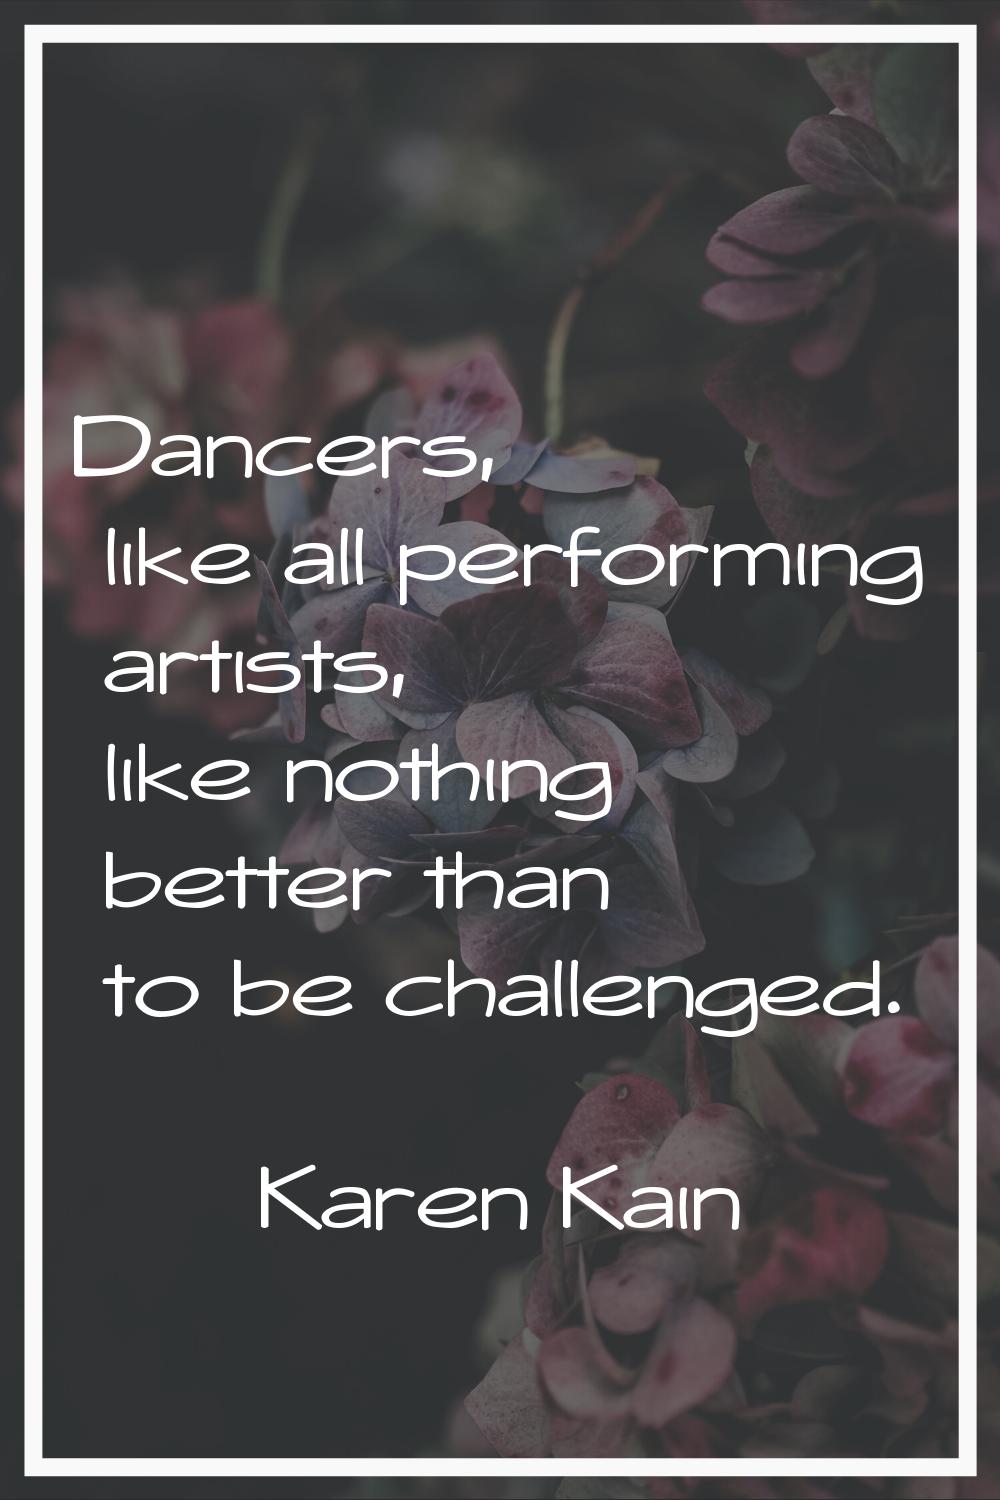 Dancers, like all performing artists, like nothing better than to be challenged.